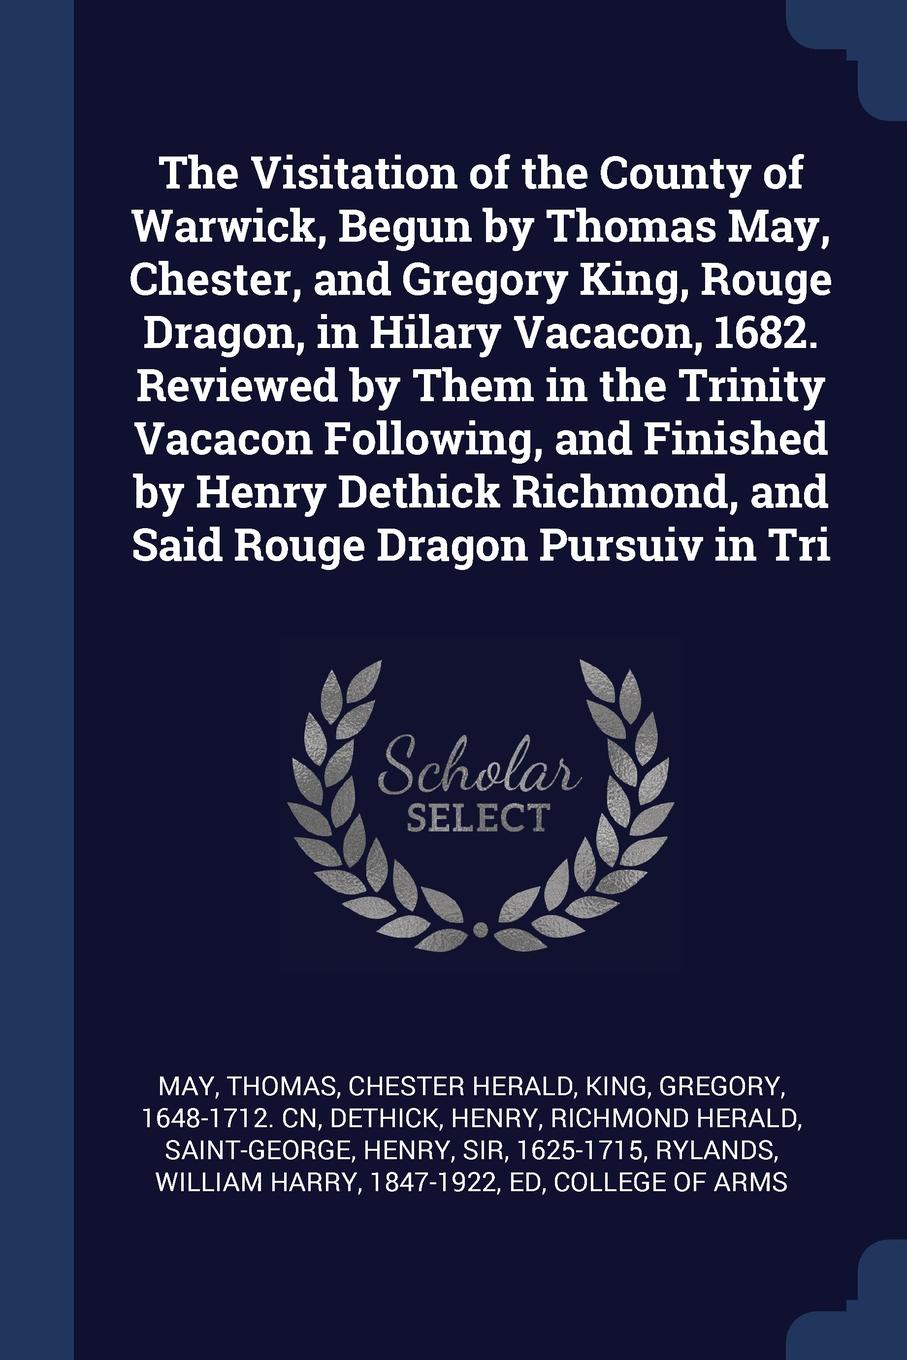 The Visitation of the County of Warwick, Begun by Thomas May, Chester, and Gregory King, Rouge Dragon, in Hilary Vacacon, 1682. Reviewed by Them in the Trinity Vacacon Following, and Finished by Henry Dethick Richmond, and Said Rouge Dragon Pursui...